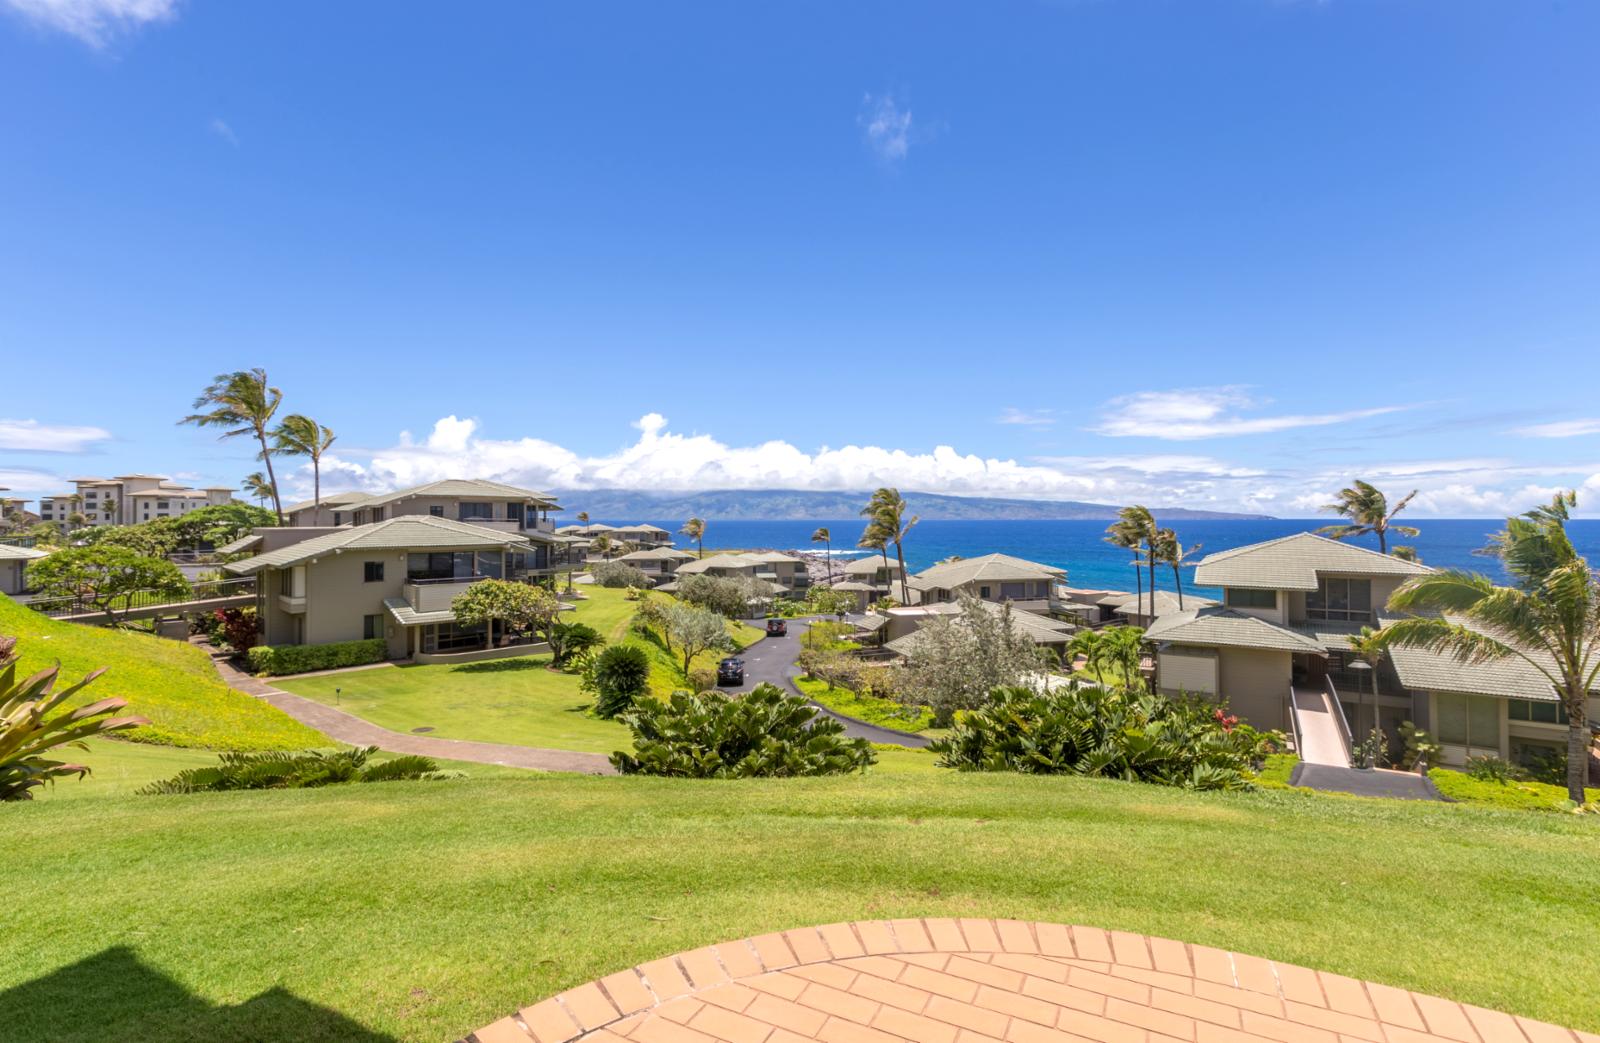 180 degree ocean views from 2 of the 3 private ground floor lanais